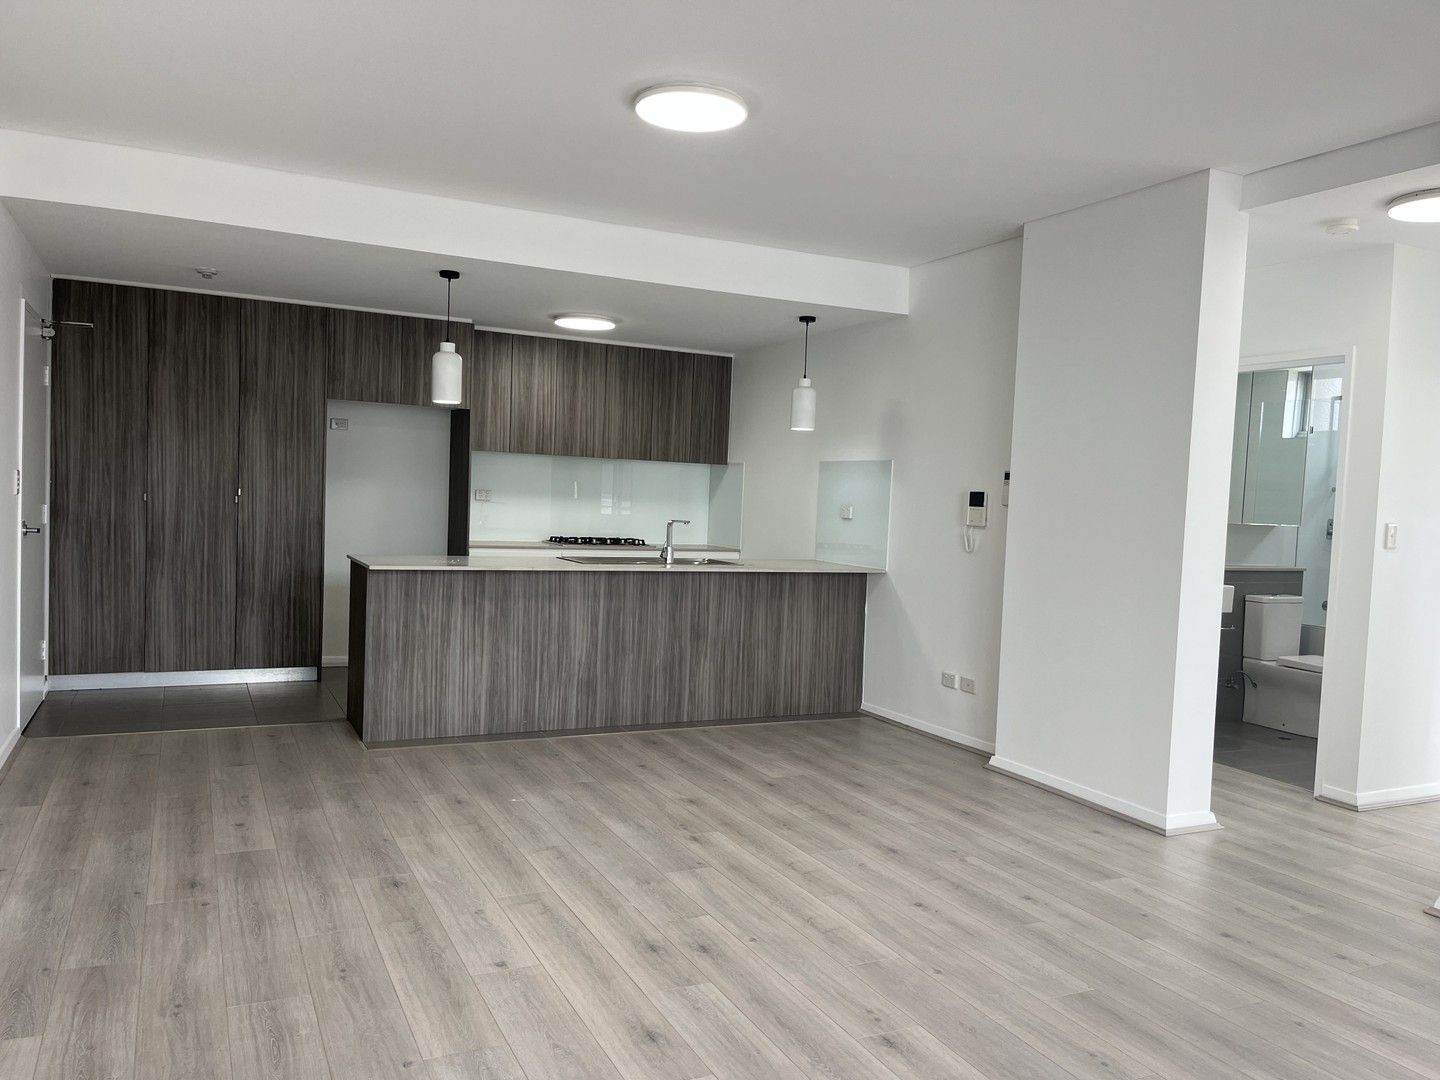 2 bedrooms Apartment / Unit / Flat in CALL/US NOW TO BOOK YOUR INSPECTION ROUSE HILL NSW, 2155